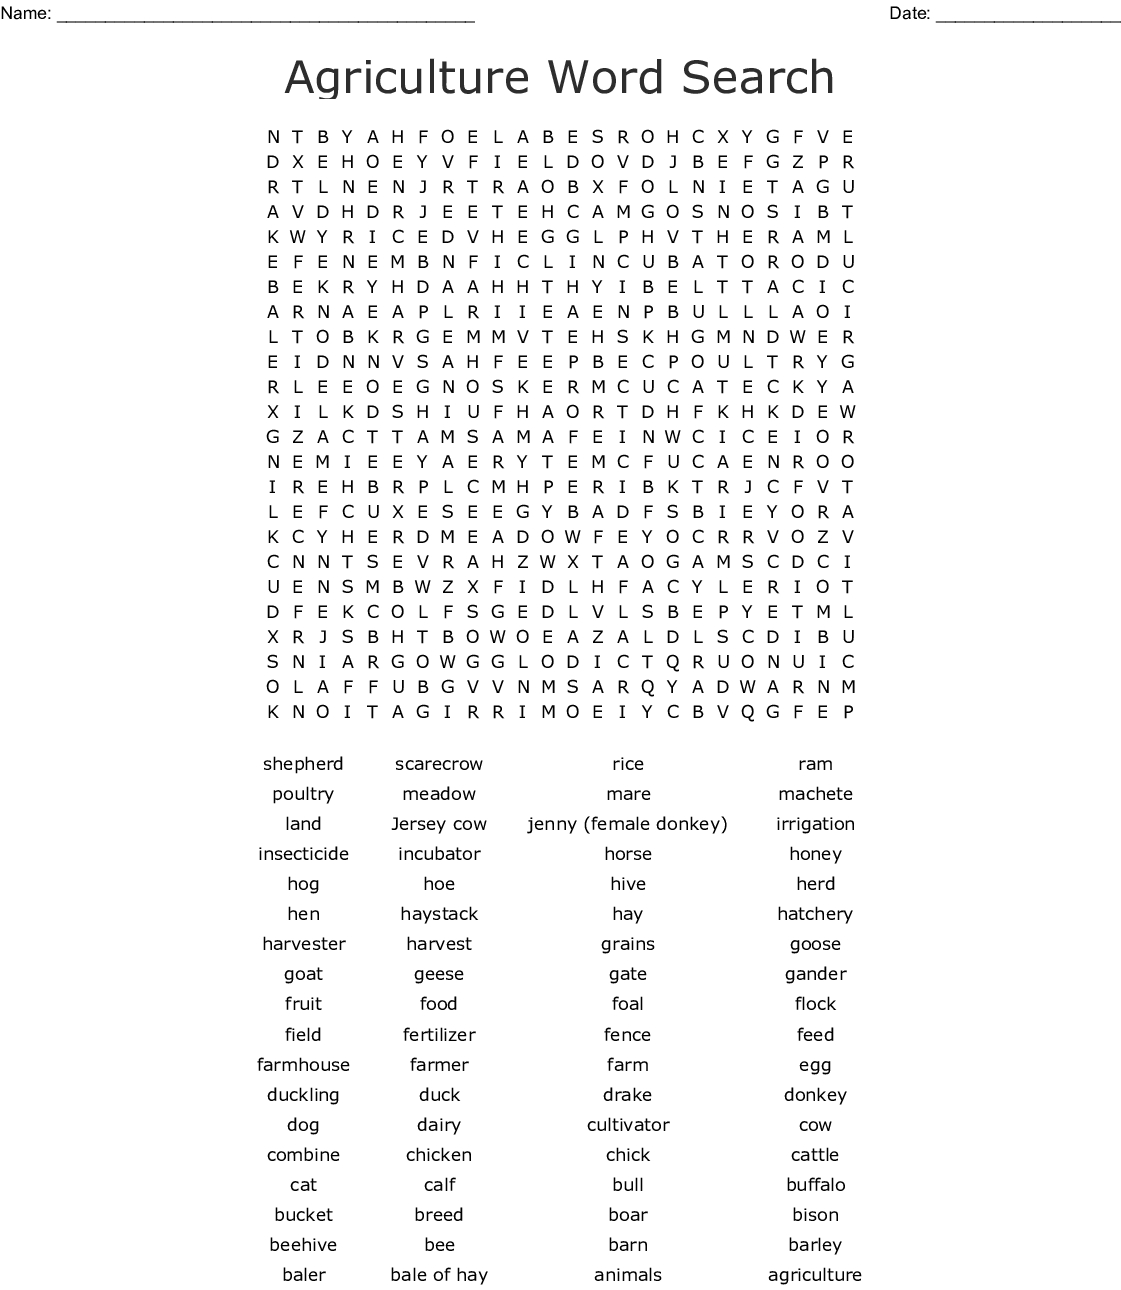 Things You Find On A Farm Word Search - Wordmint